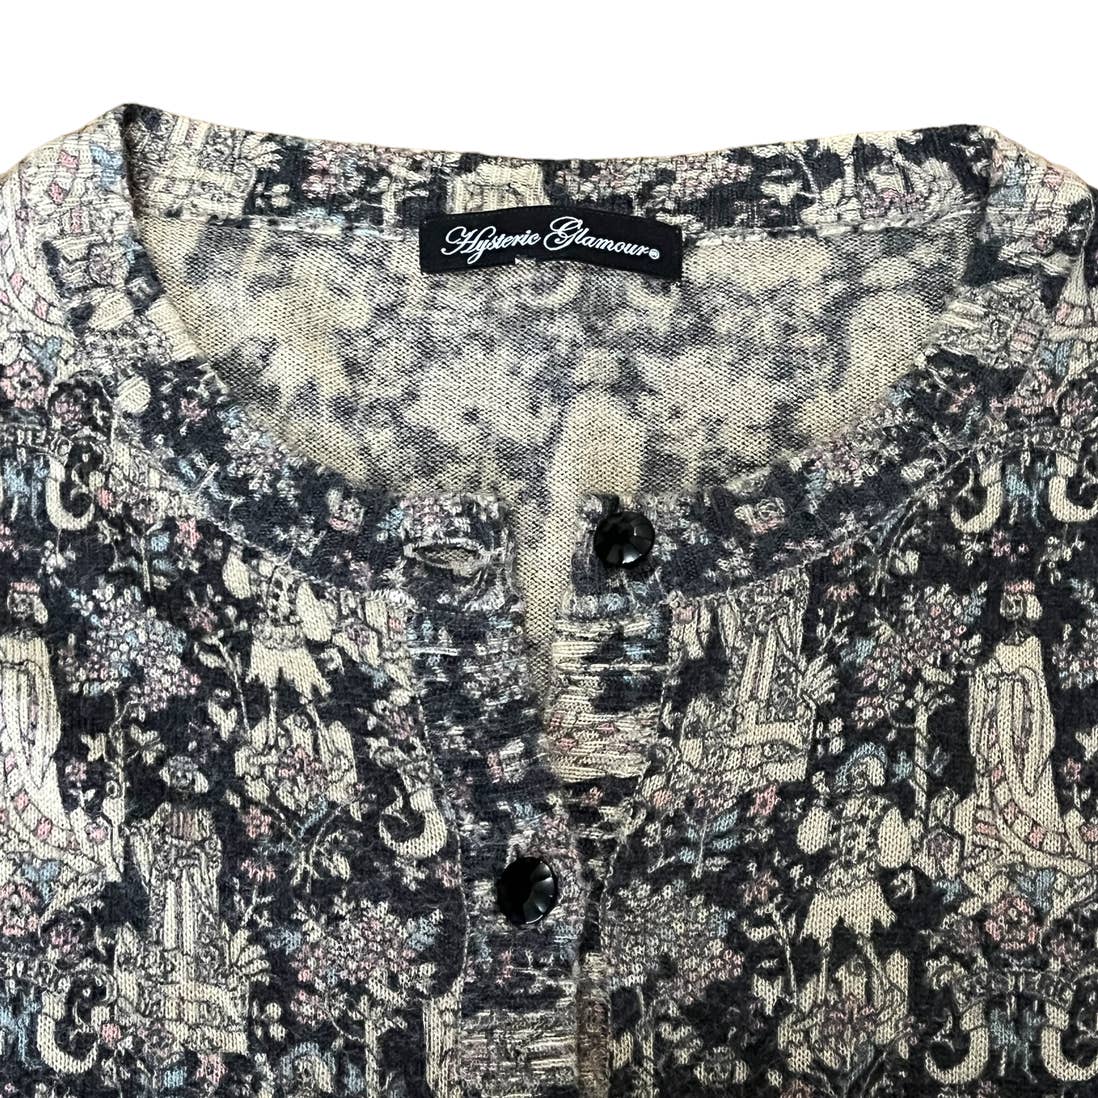 Hysteric Glamour Skeleton Print Top